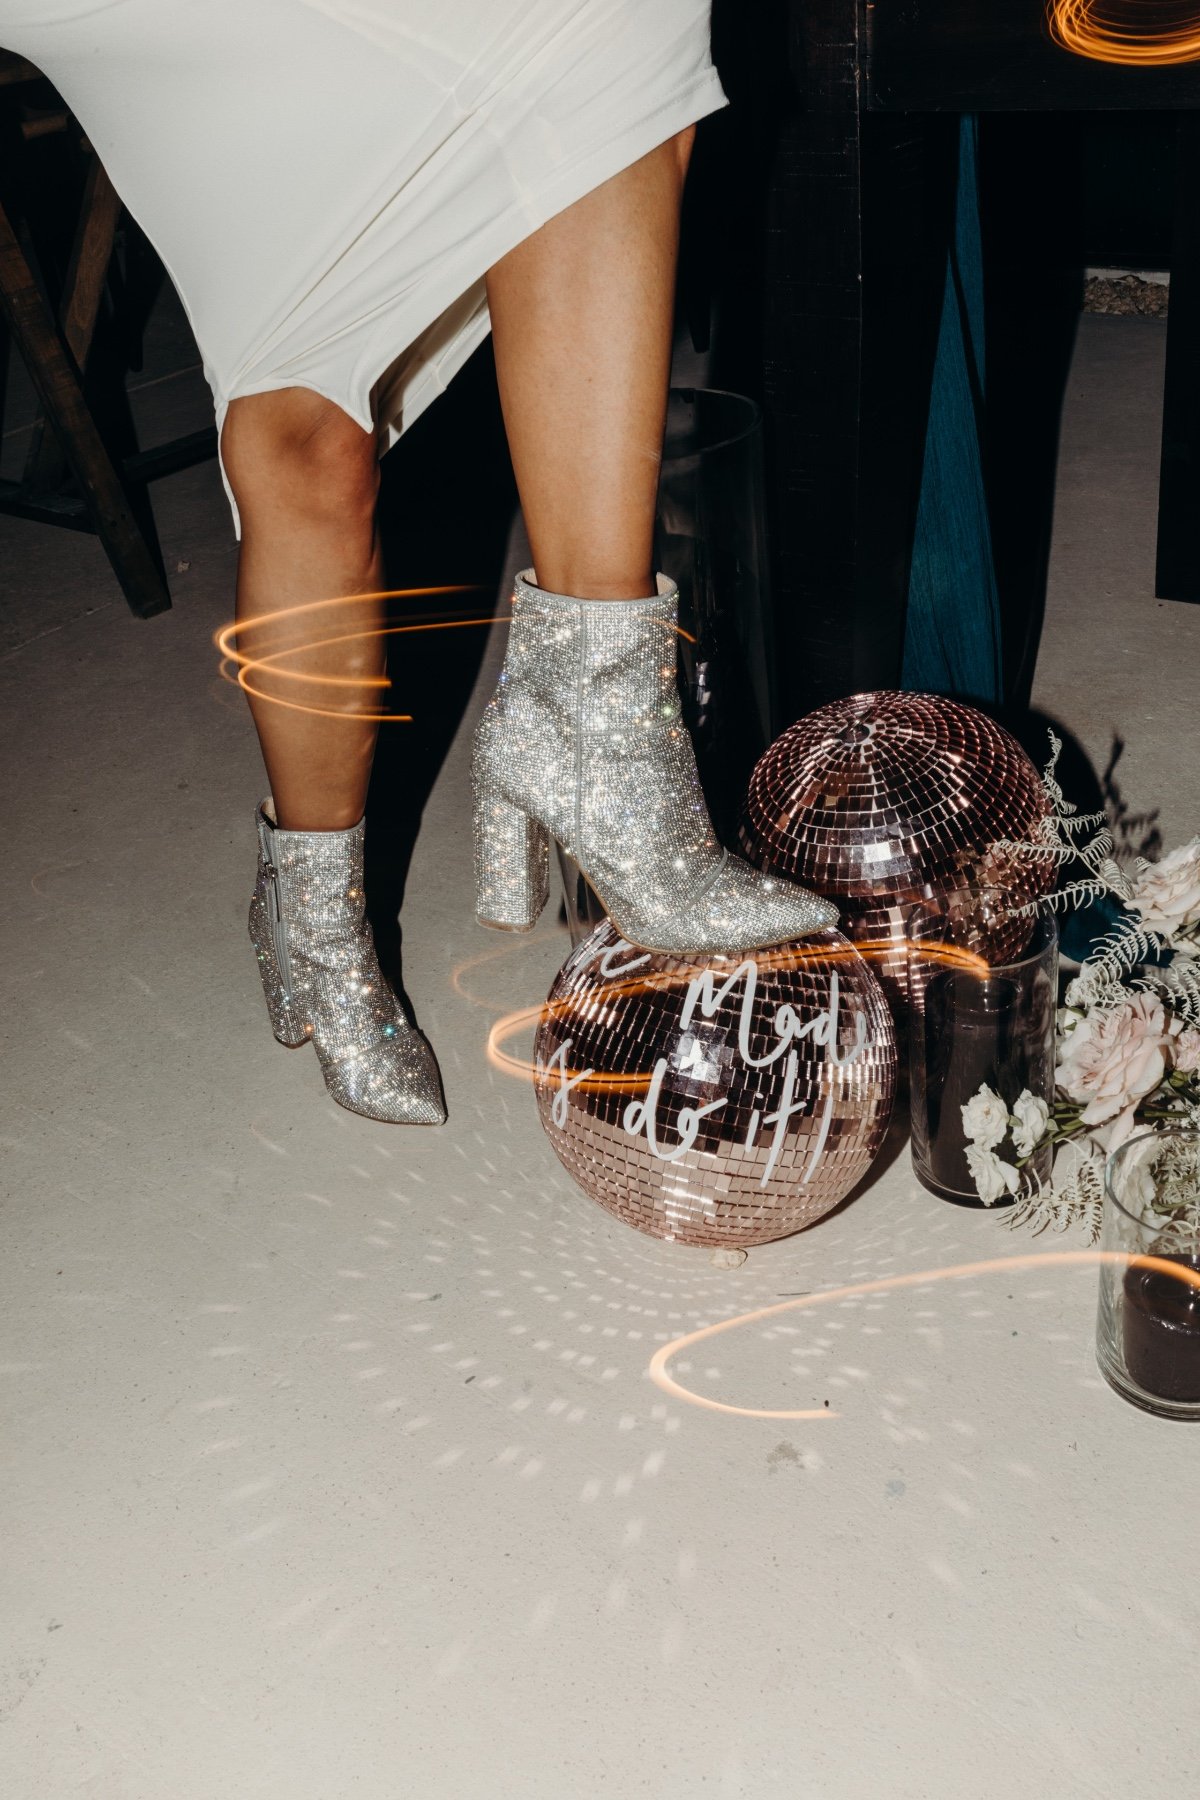 Bride stepping on disco ball in sparkly reception booties